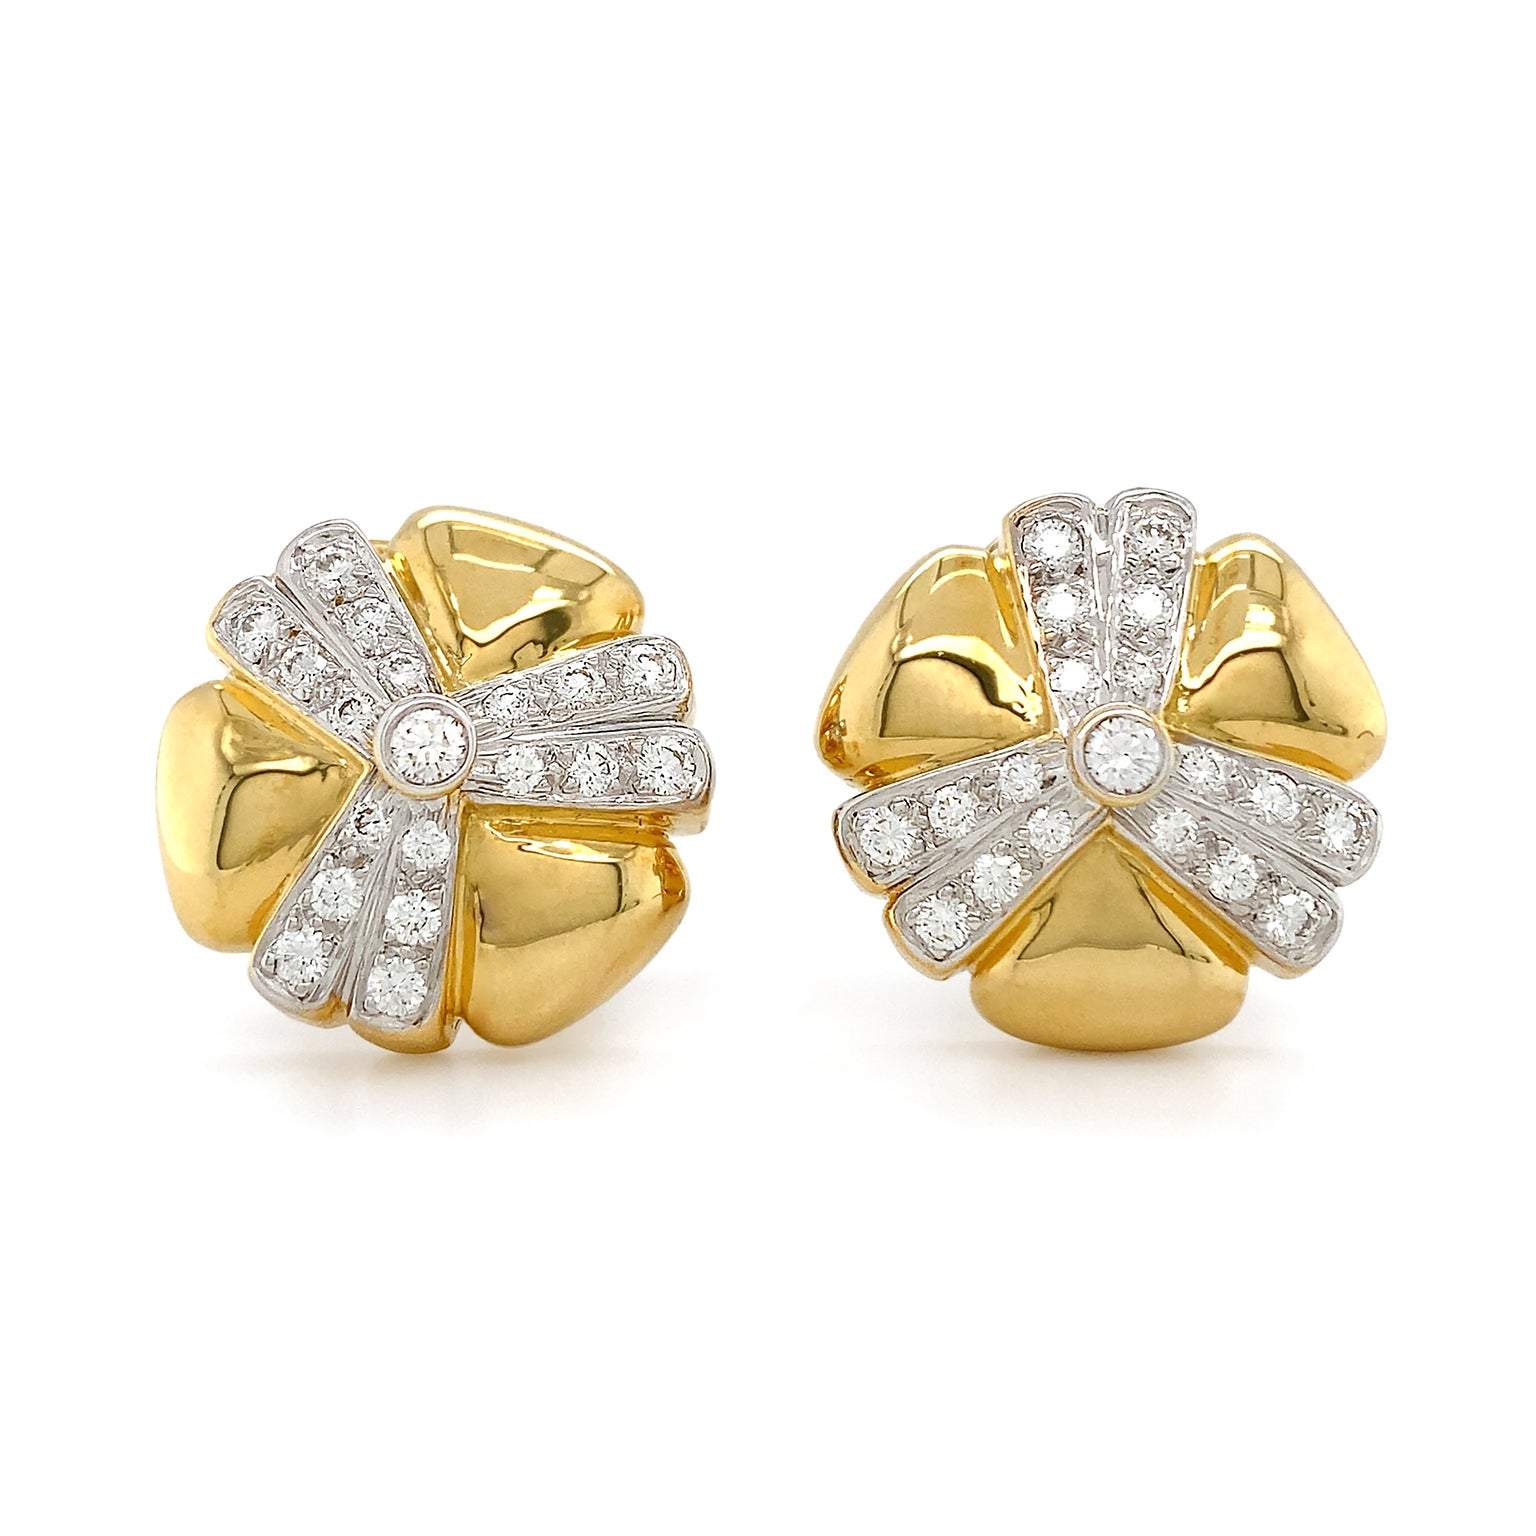 Radiant luster give these earrings a remarkable flare. 18k yellow gold triangles with rounded corners forms the outline of a clover. In between each section of gold, two rows of pave set brilliant cut diamonds sparkle, with a single diamond bezel